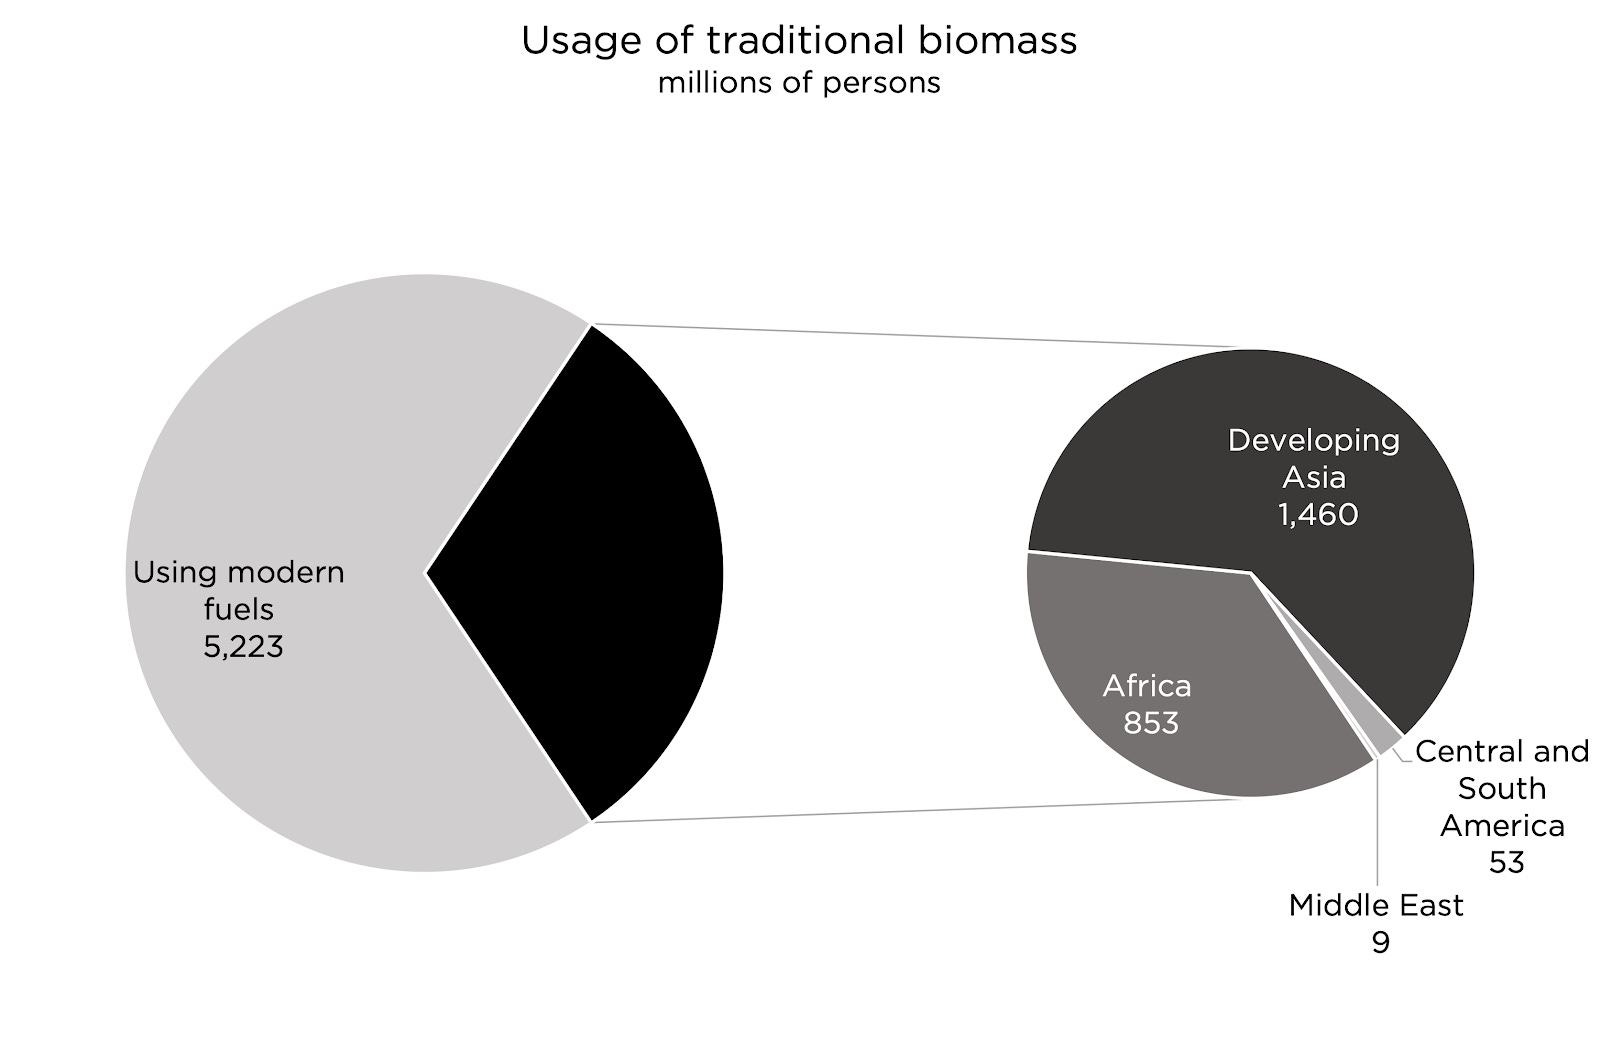 IMAGE 5 - Useage of traditional biomass